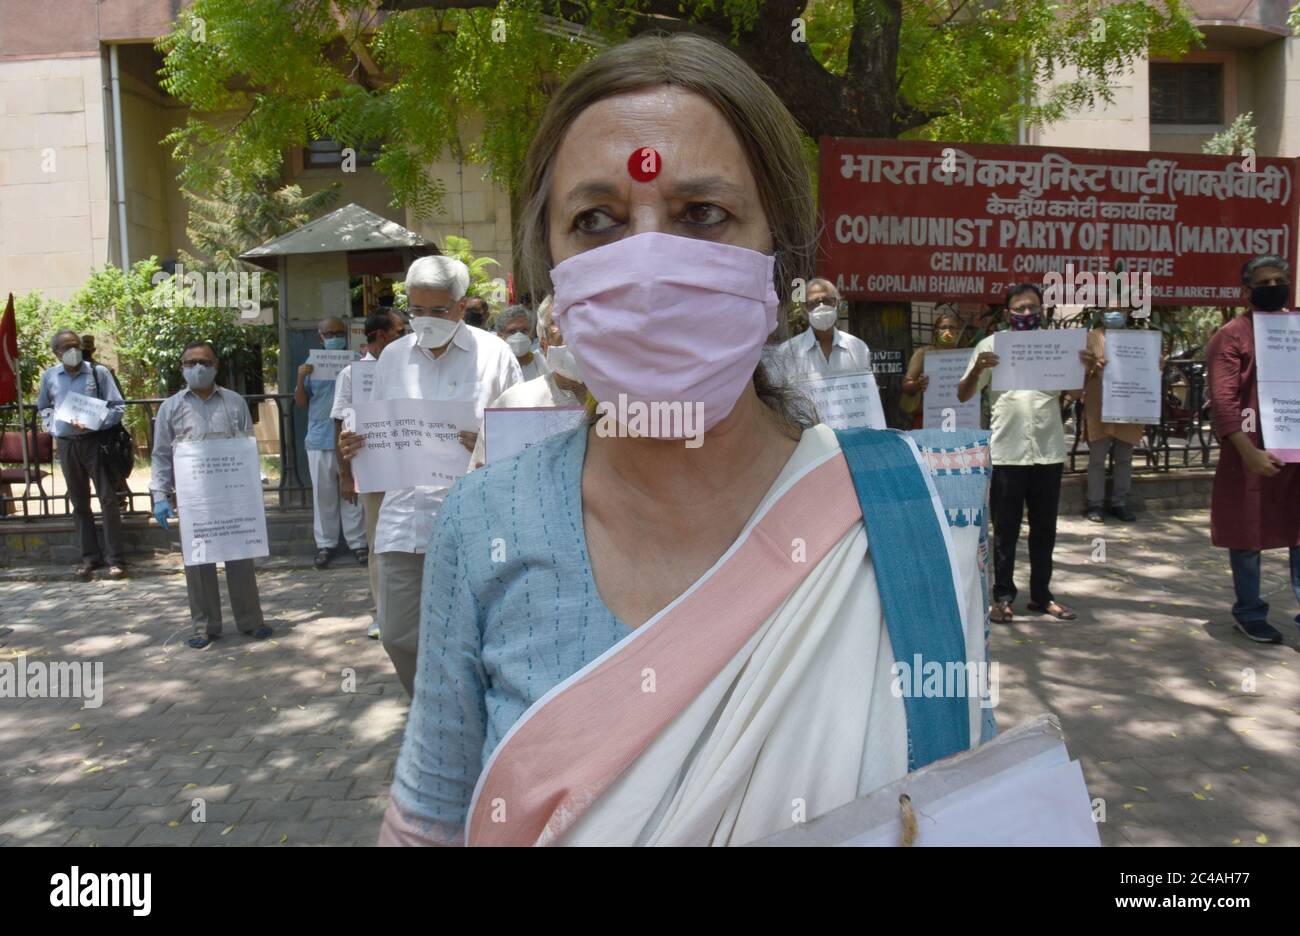 Polit Bureau member Brinda Karat of Communist Party of India - Marxist during a protest outside Party  headquarters in New Delhi, India, on Tuesday Ju Stock Photo